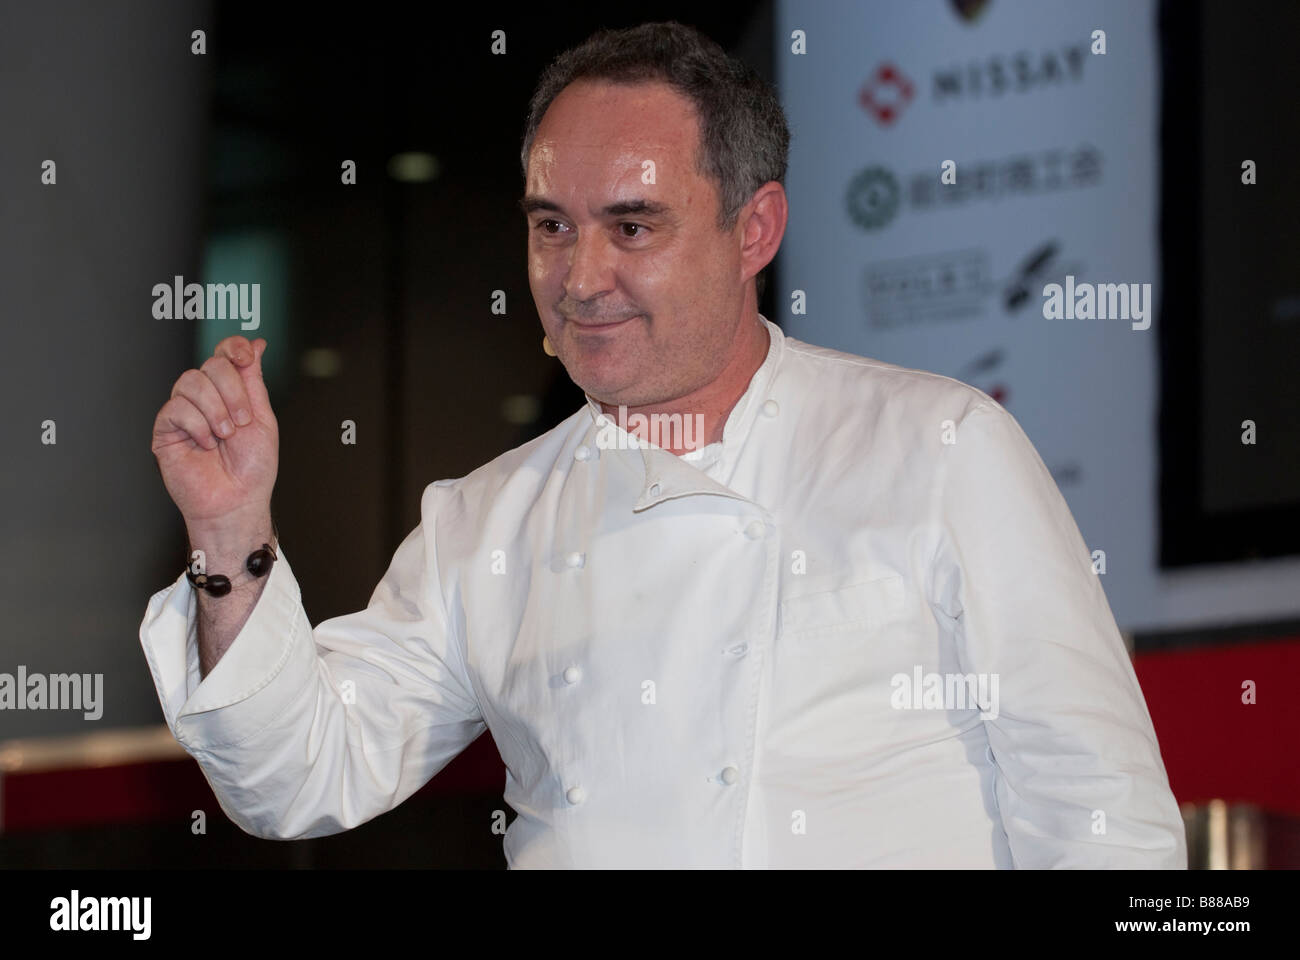 Chef Ferran Adria gives a speech and demonstration at the Tokyo Taste: The World Summit of Gastronomy 2009, 10 February 2009. Stock Photo